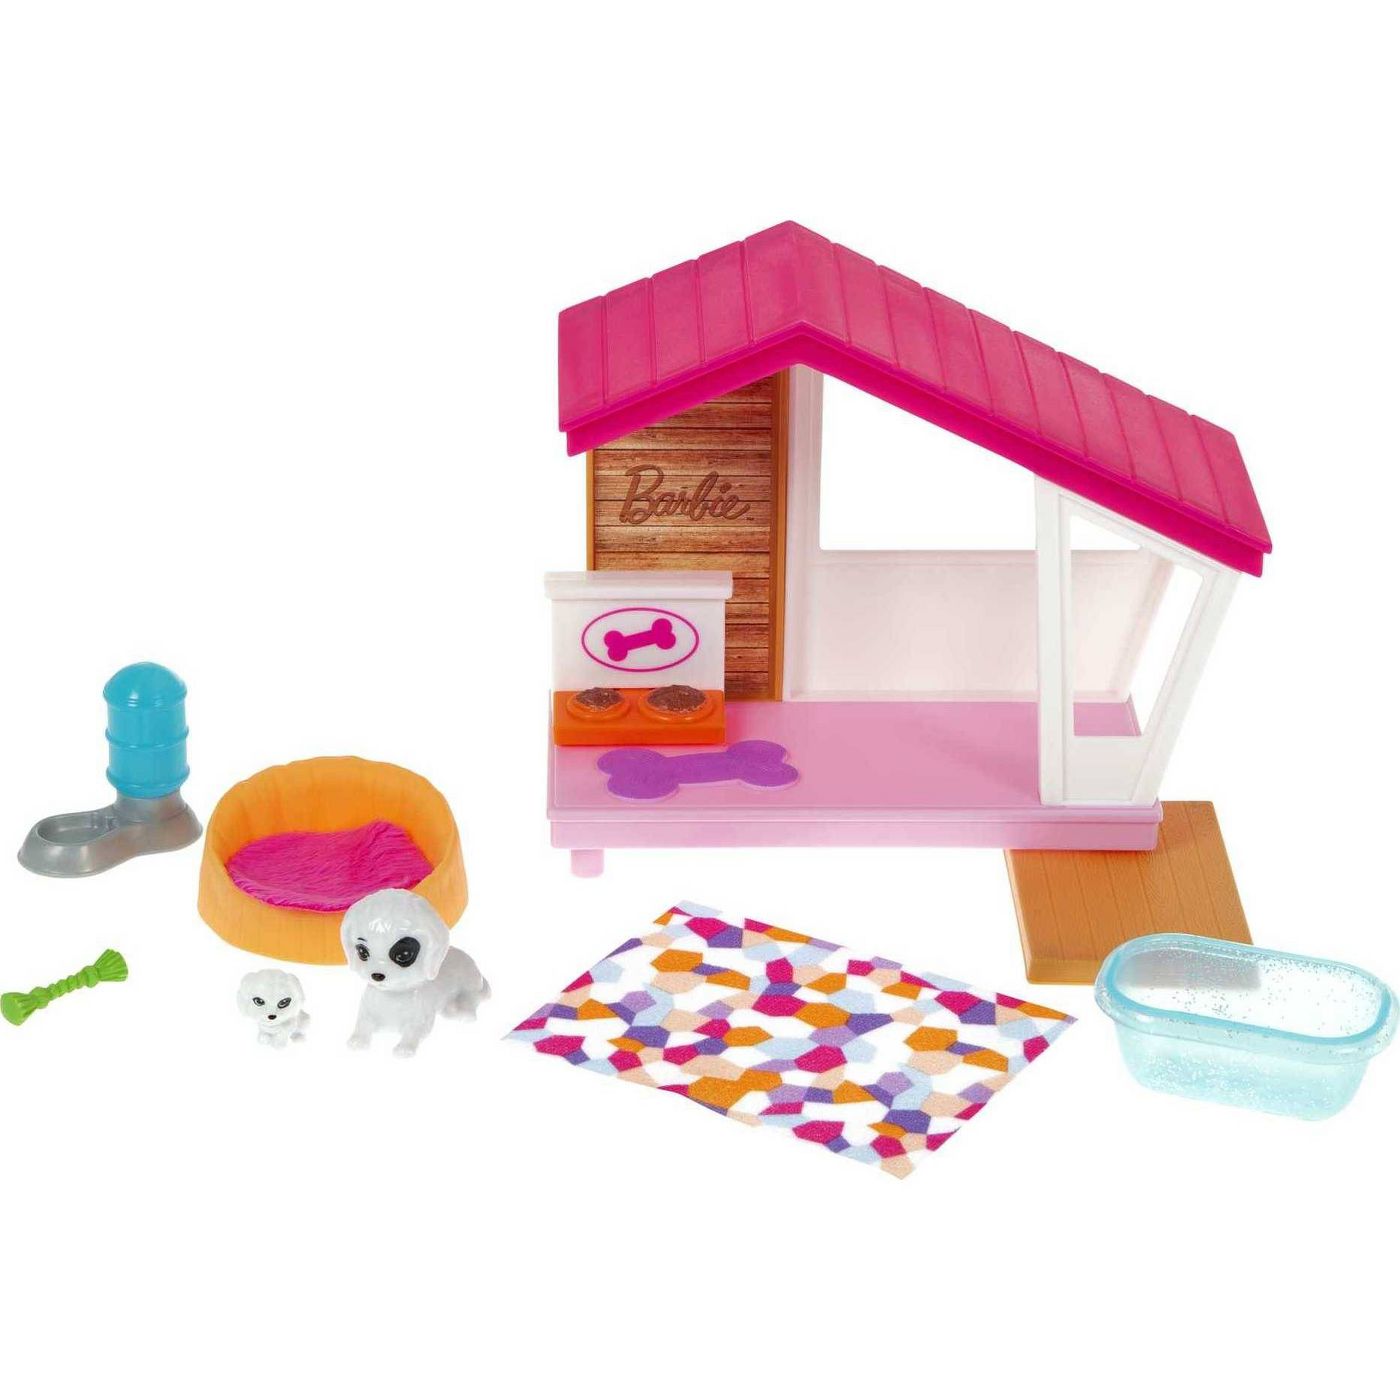 Barbie Mini Doghouse Themed Dog Accessory Set New with Box